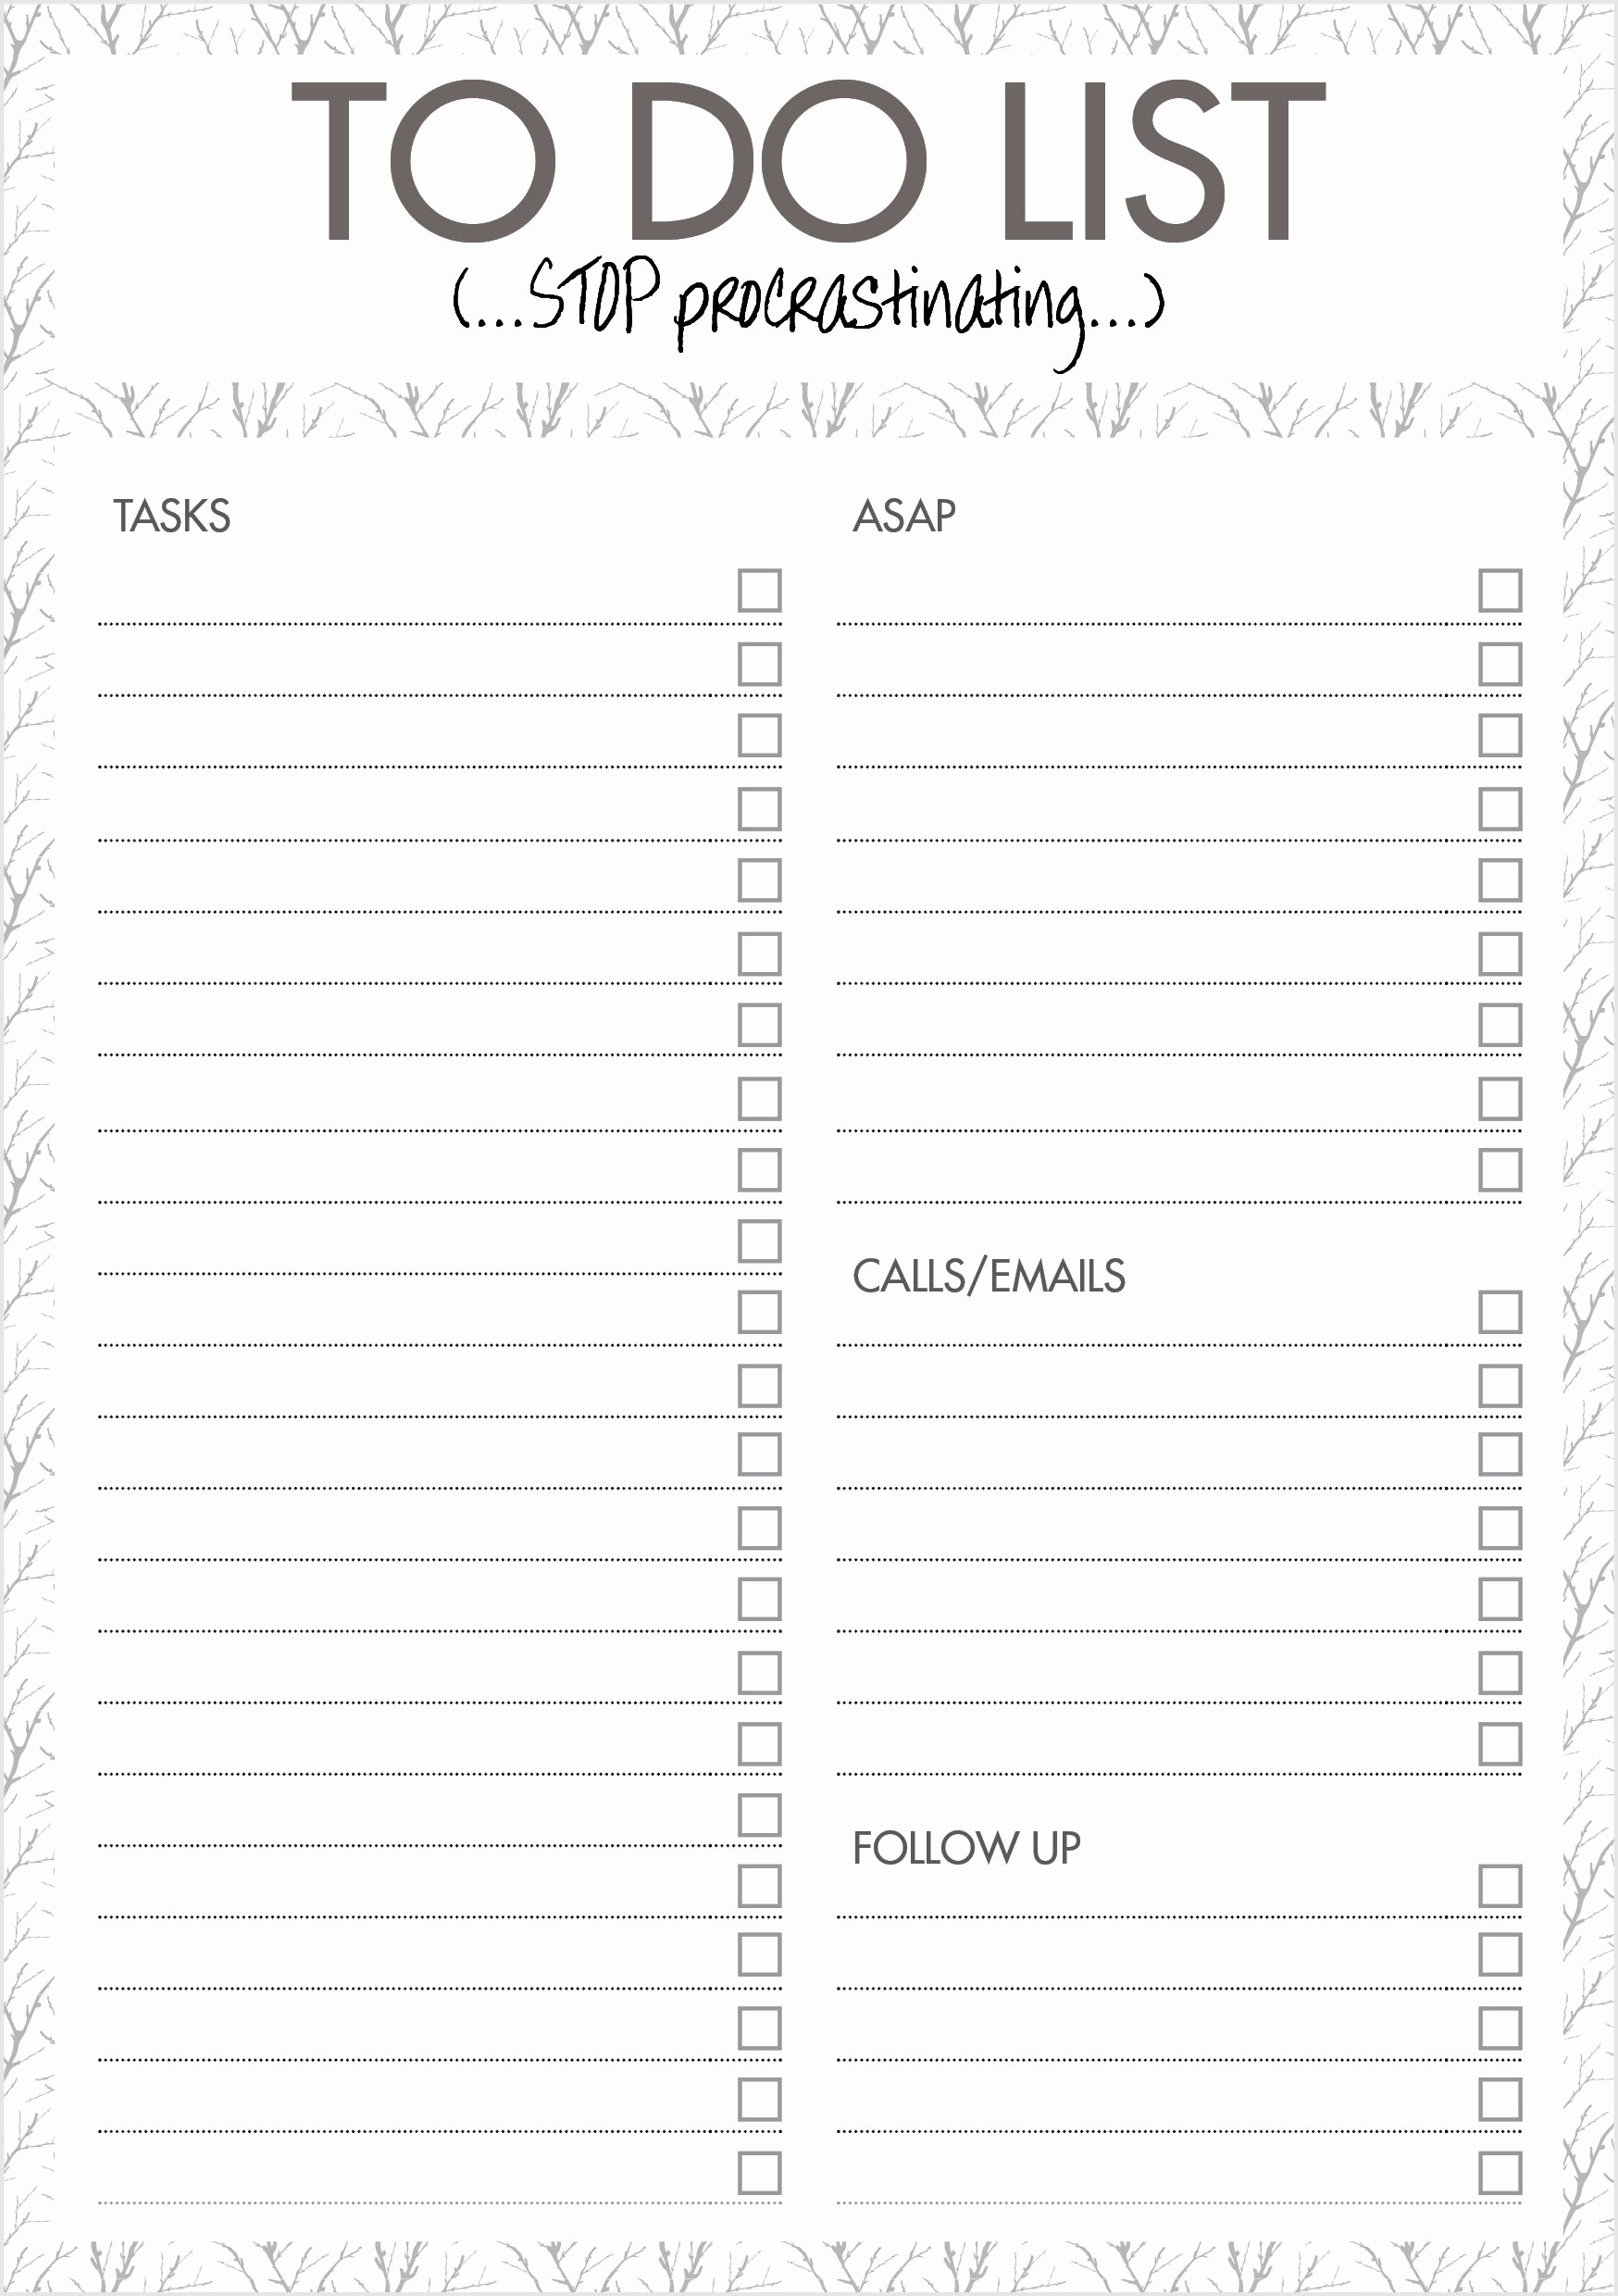 Today to Do List Template Best Of organization Templates On Pinterest